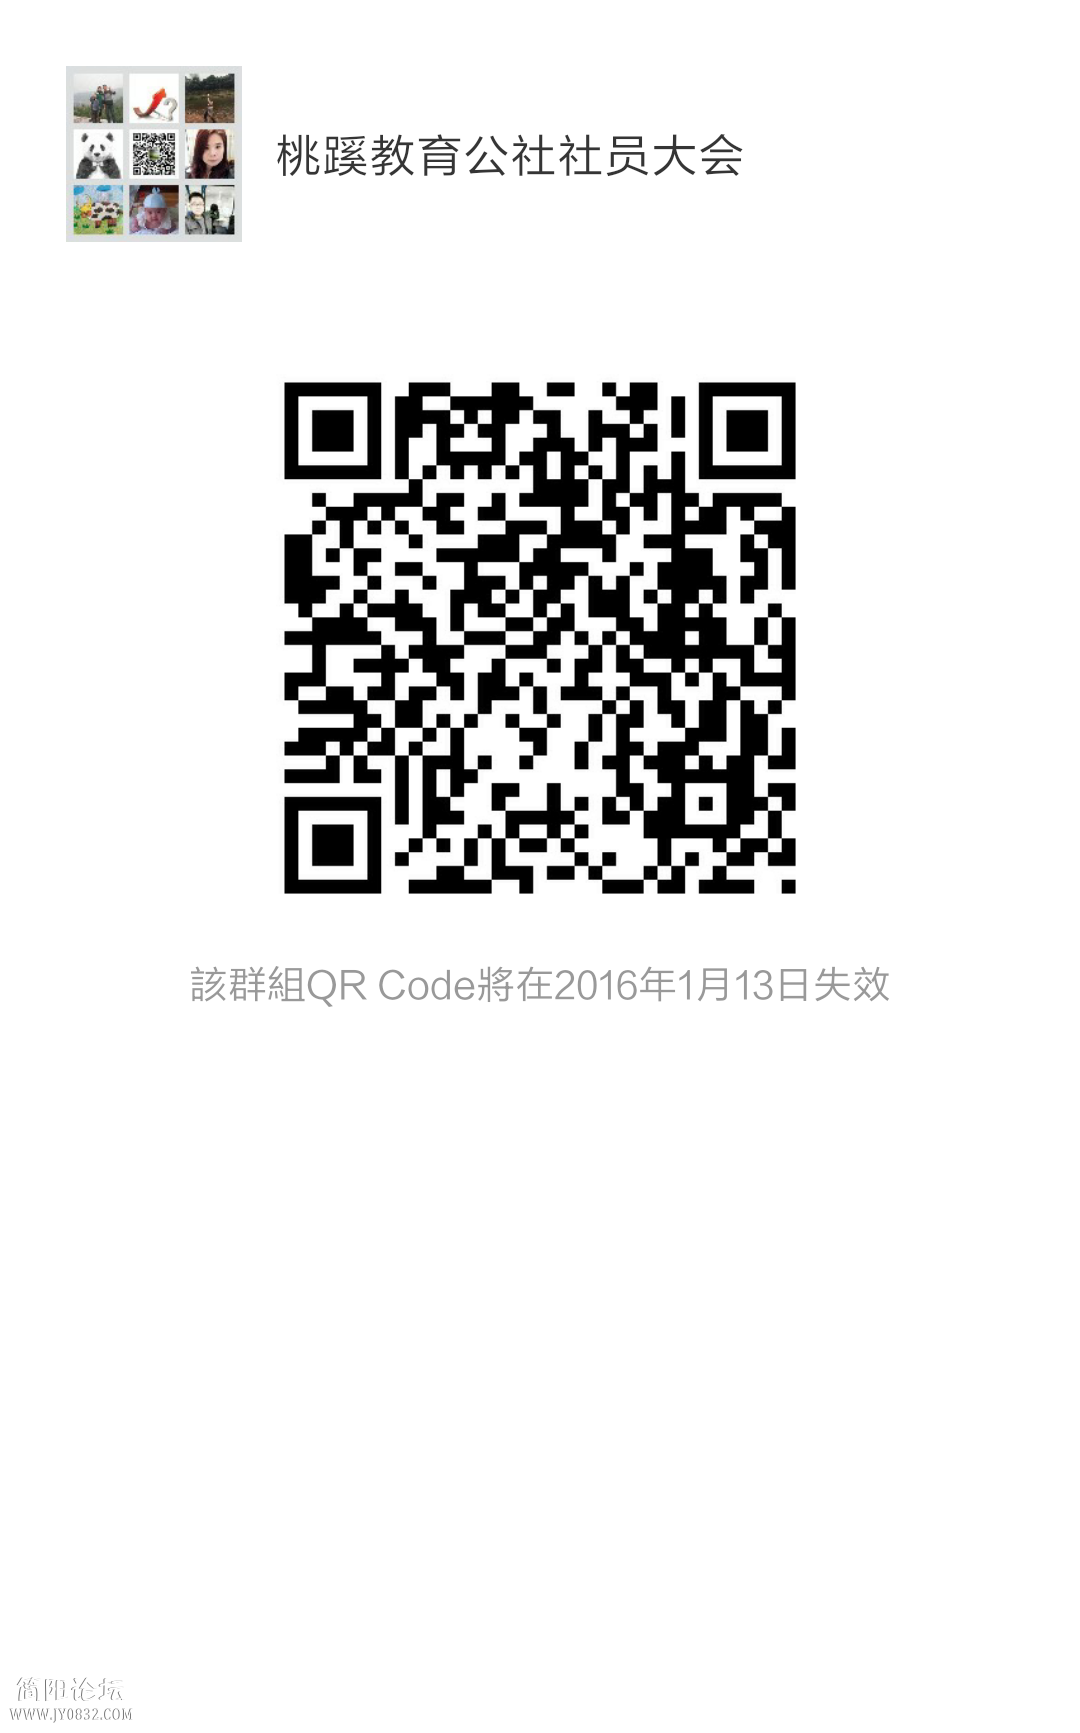 mmqrcode1452052746908[1].png